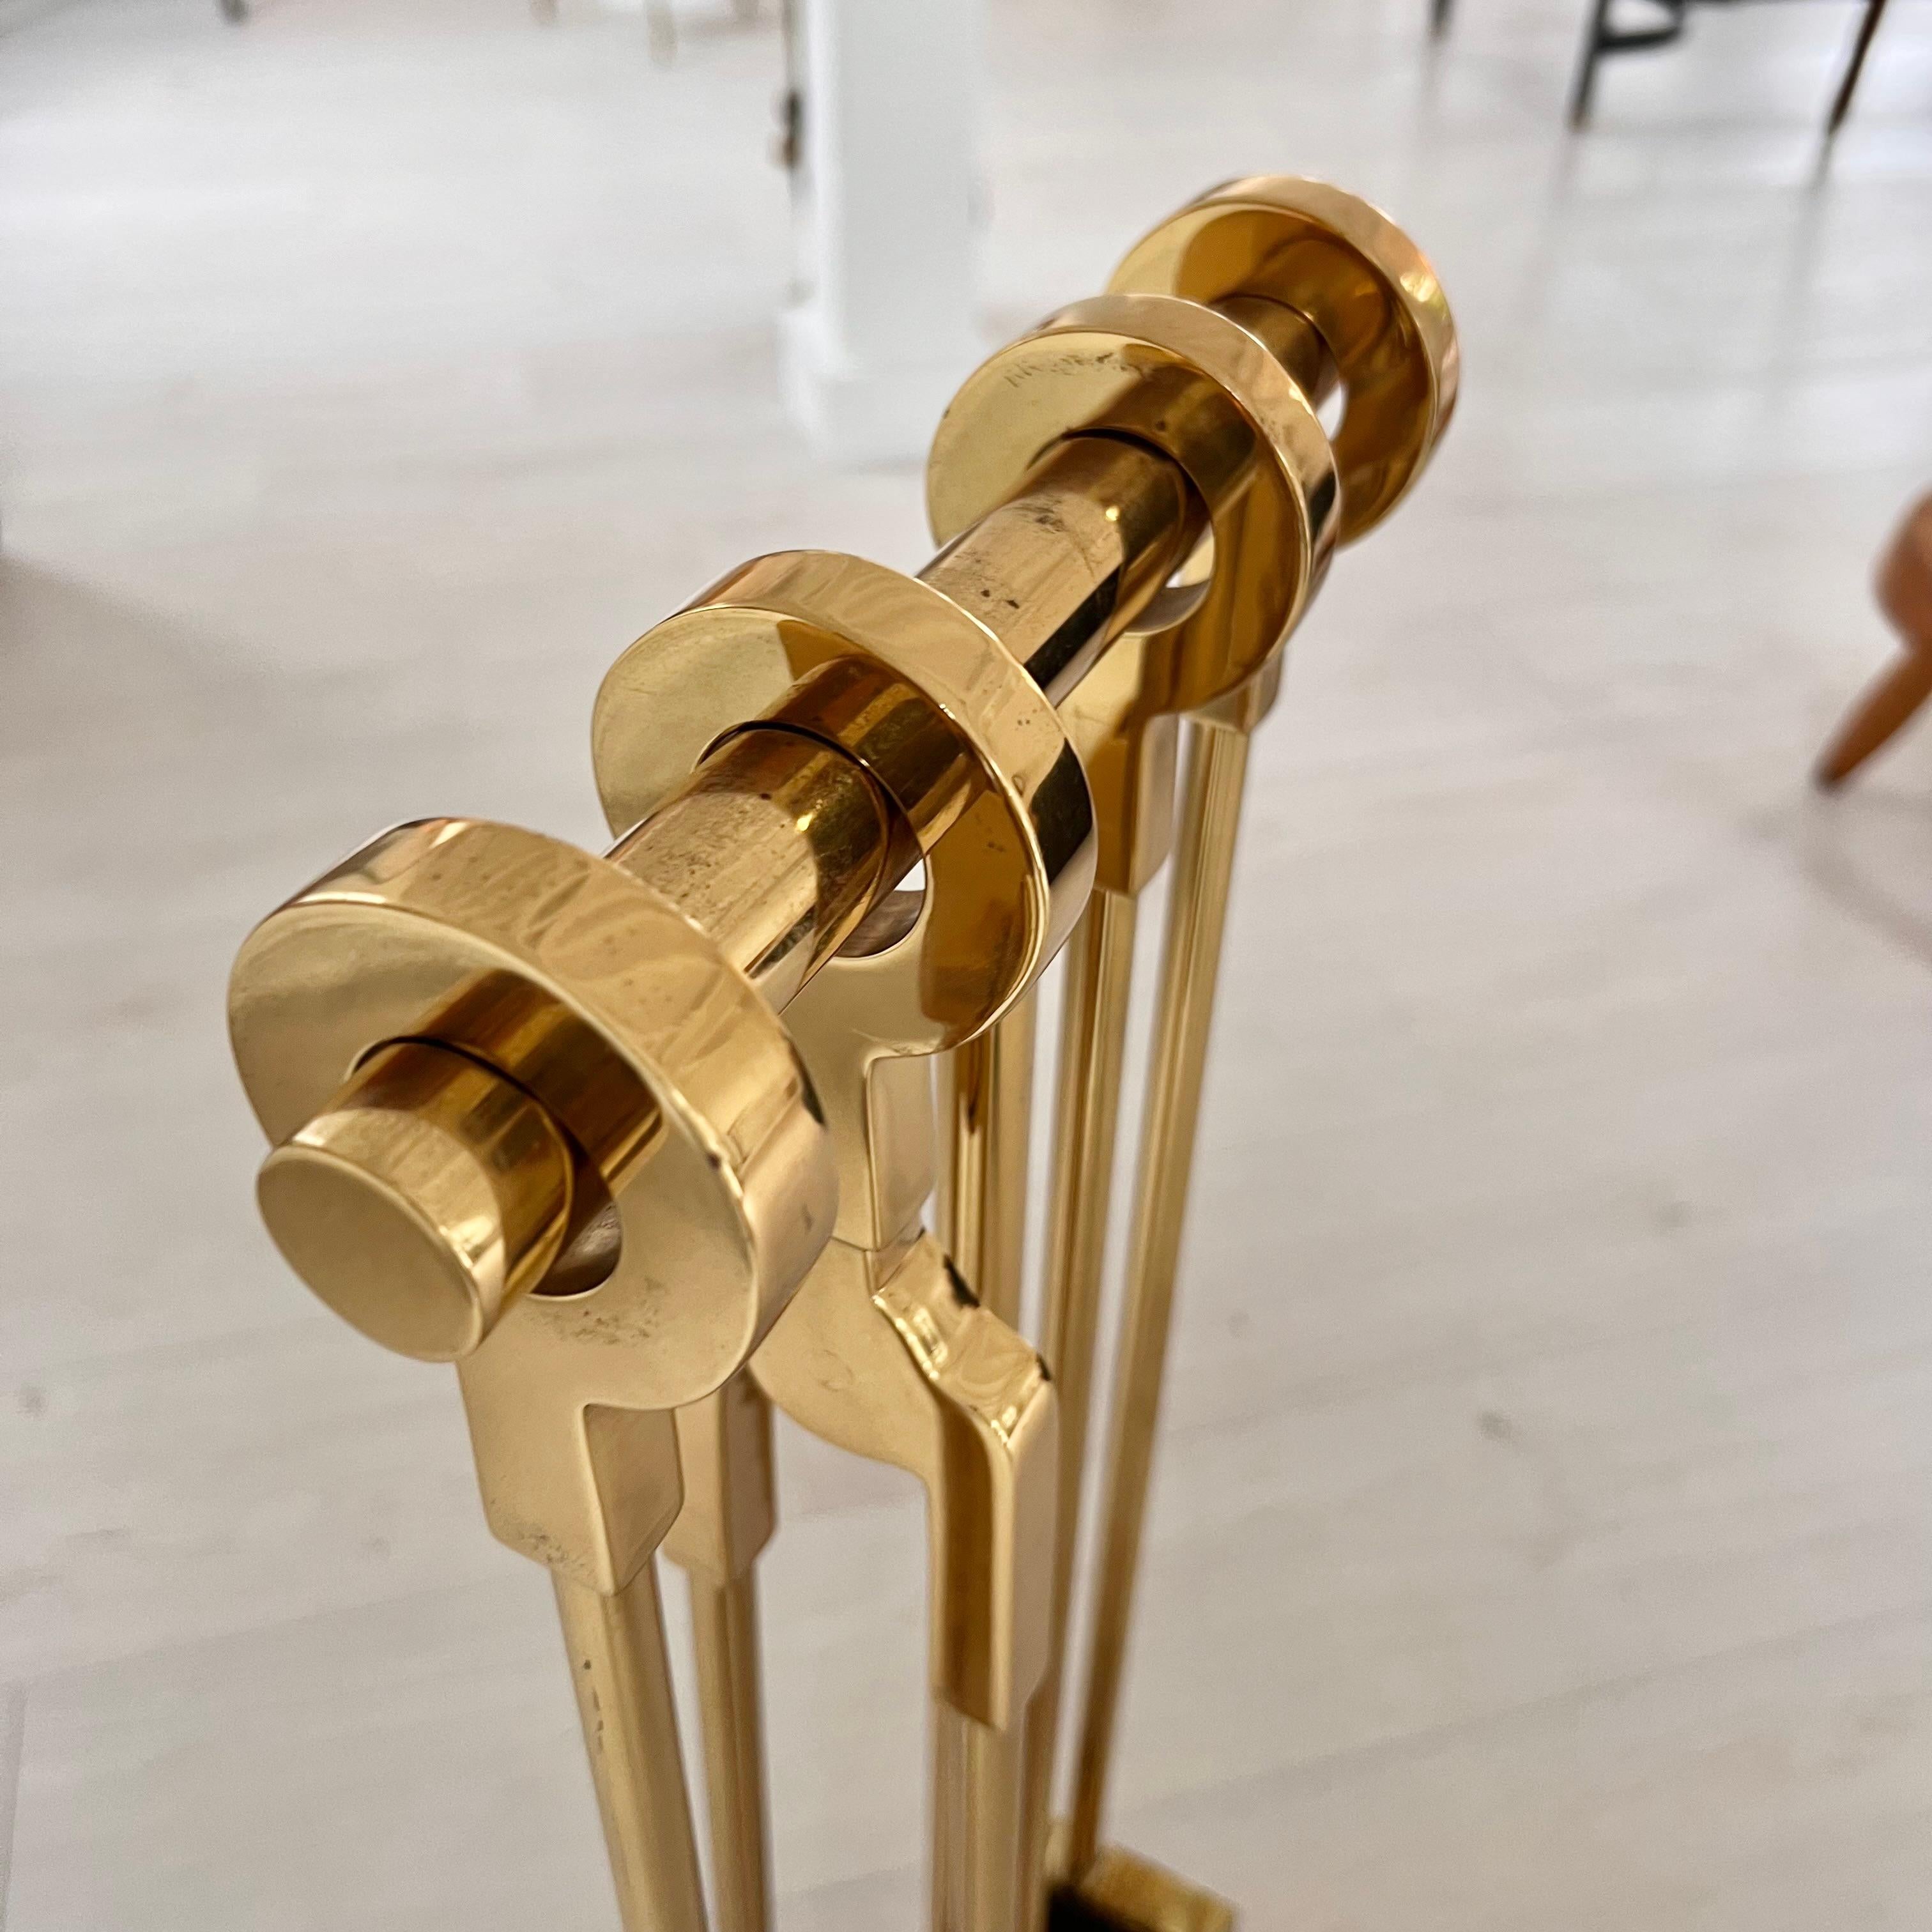 A stunning set of brass post-modern fireplace tools by Danny Alessandro. Bold and elegantly refined cast fire tools with ring handles in brass, comprising four implements each with a circular 